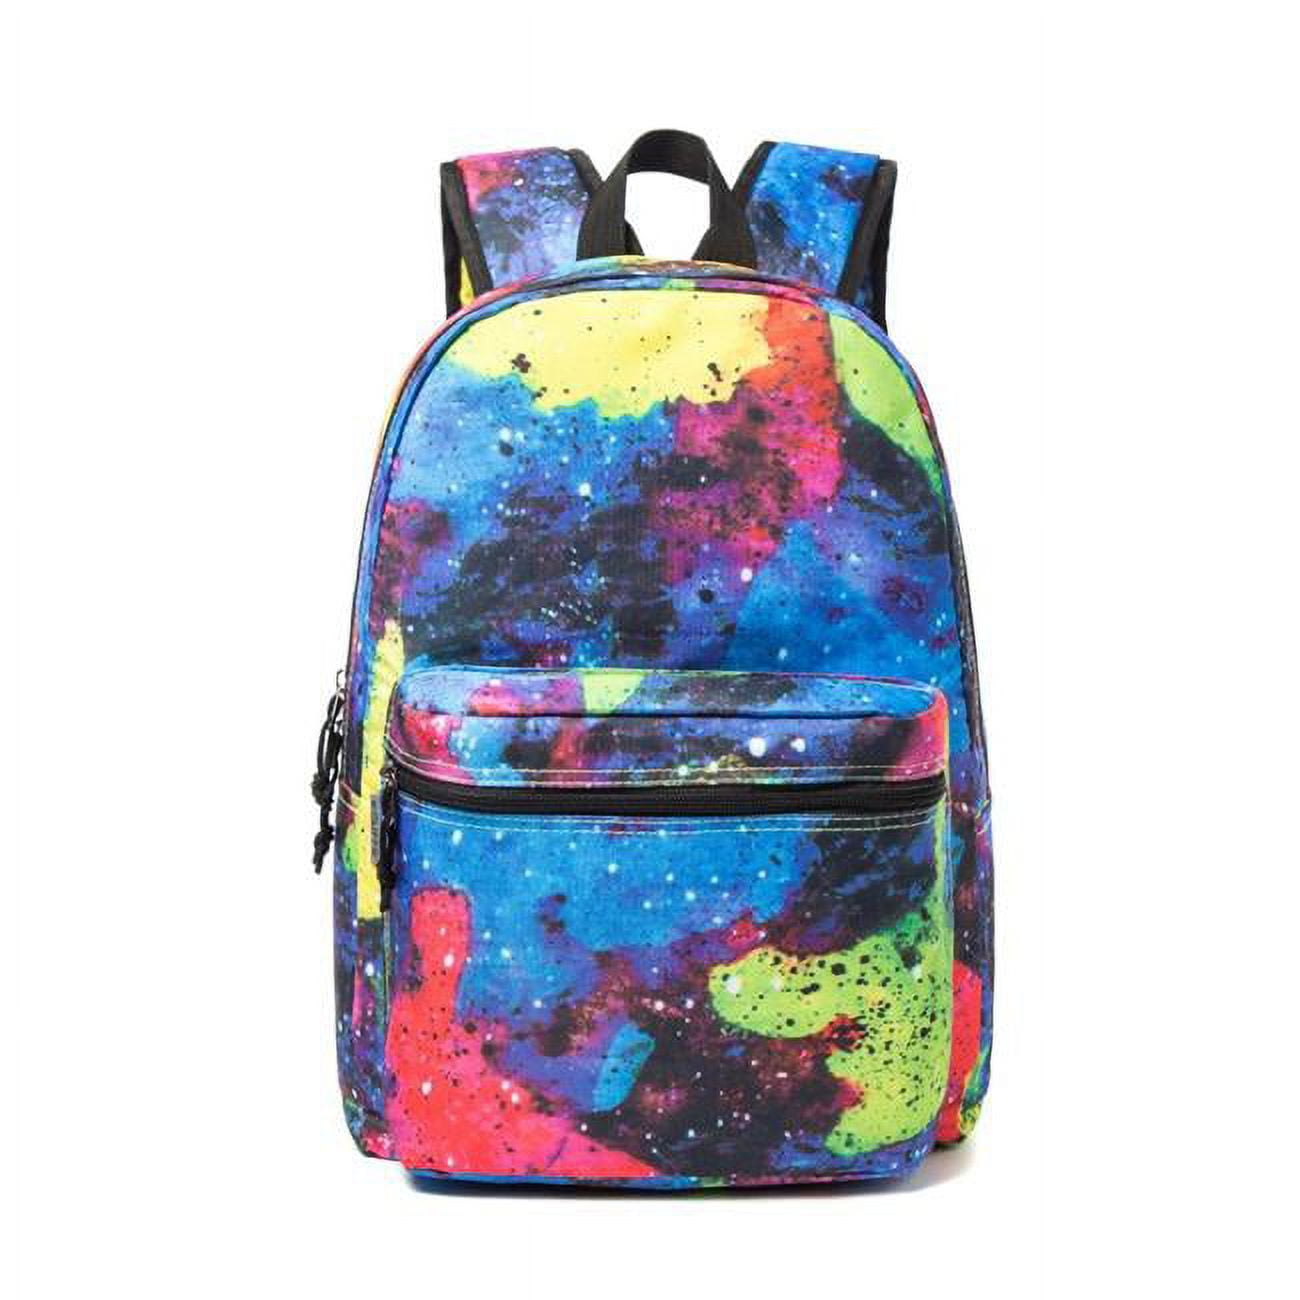 Picture of DDI 2352995 Galaxy Backpack Laptop Bookbag Case of 25